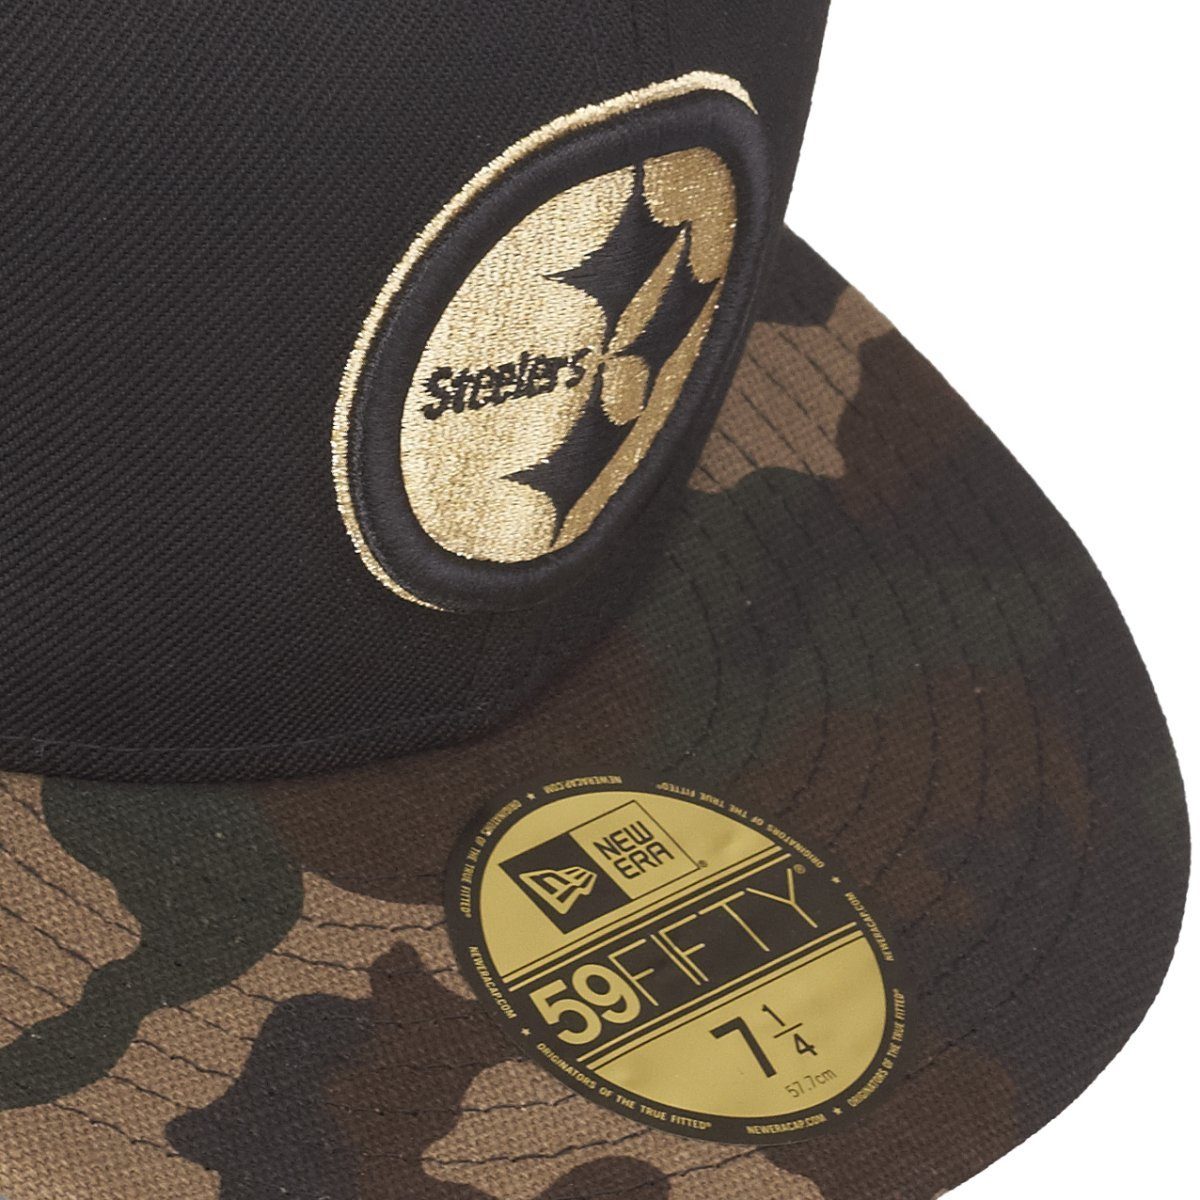 Era Cap Pittsburgh 59Fifty Fitted GOLD Steelers New